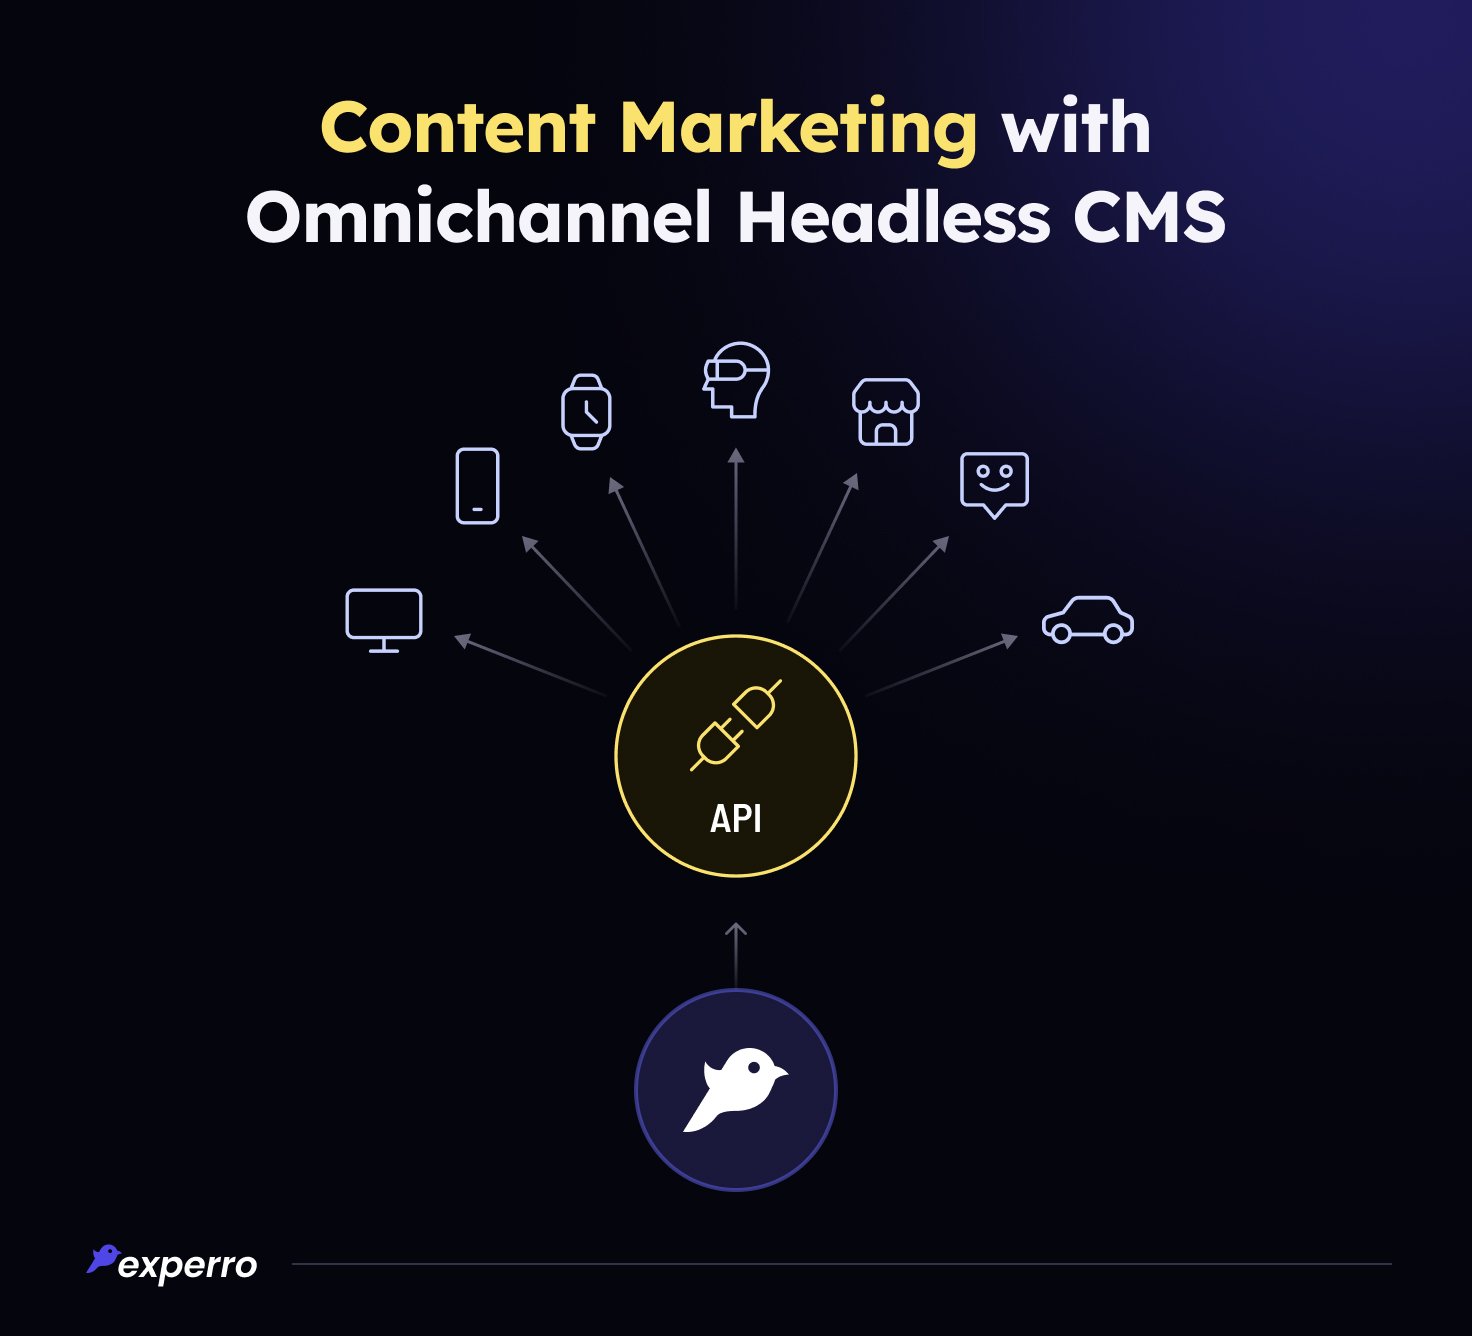 Content Marketing With Omnichannel Headless CMS